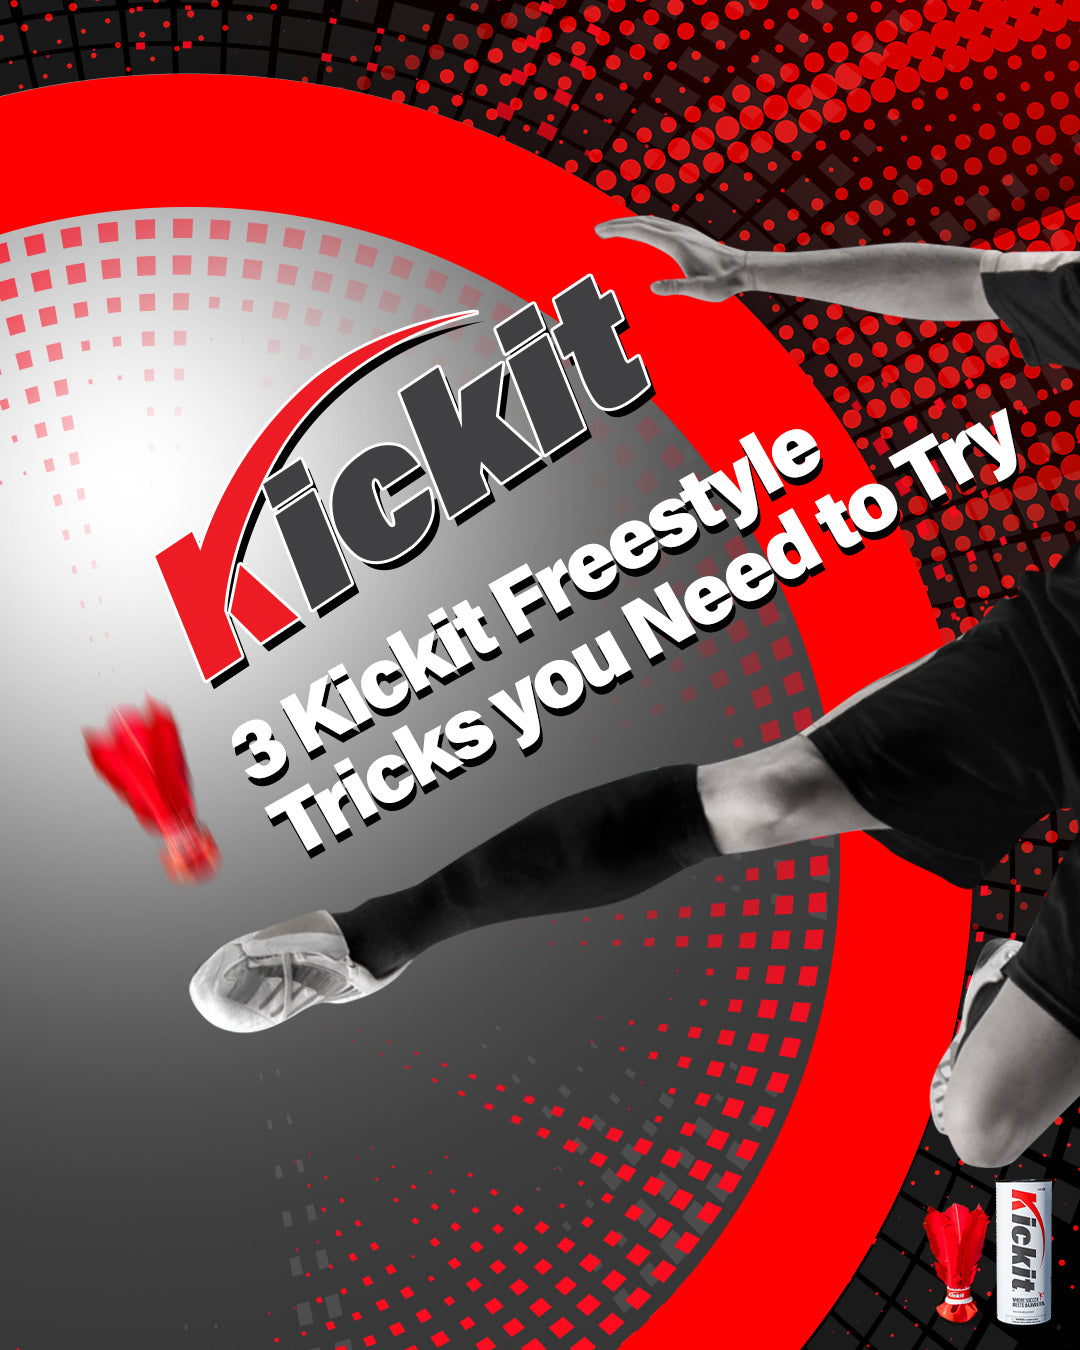 3 Kickit Freestyle Tricks you Need to Try!